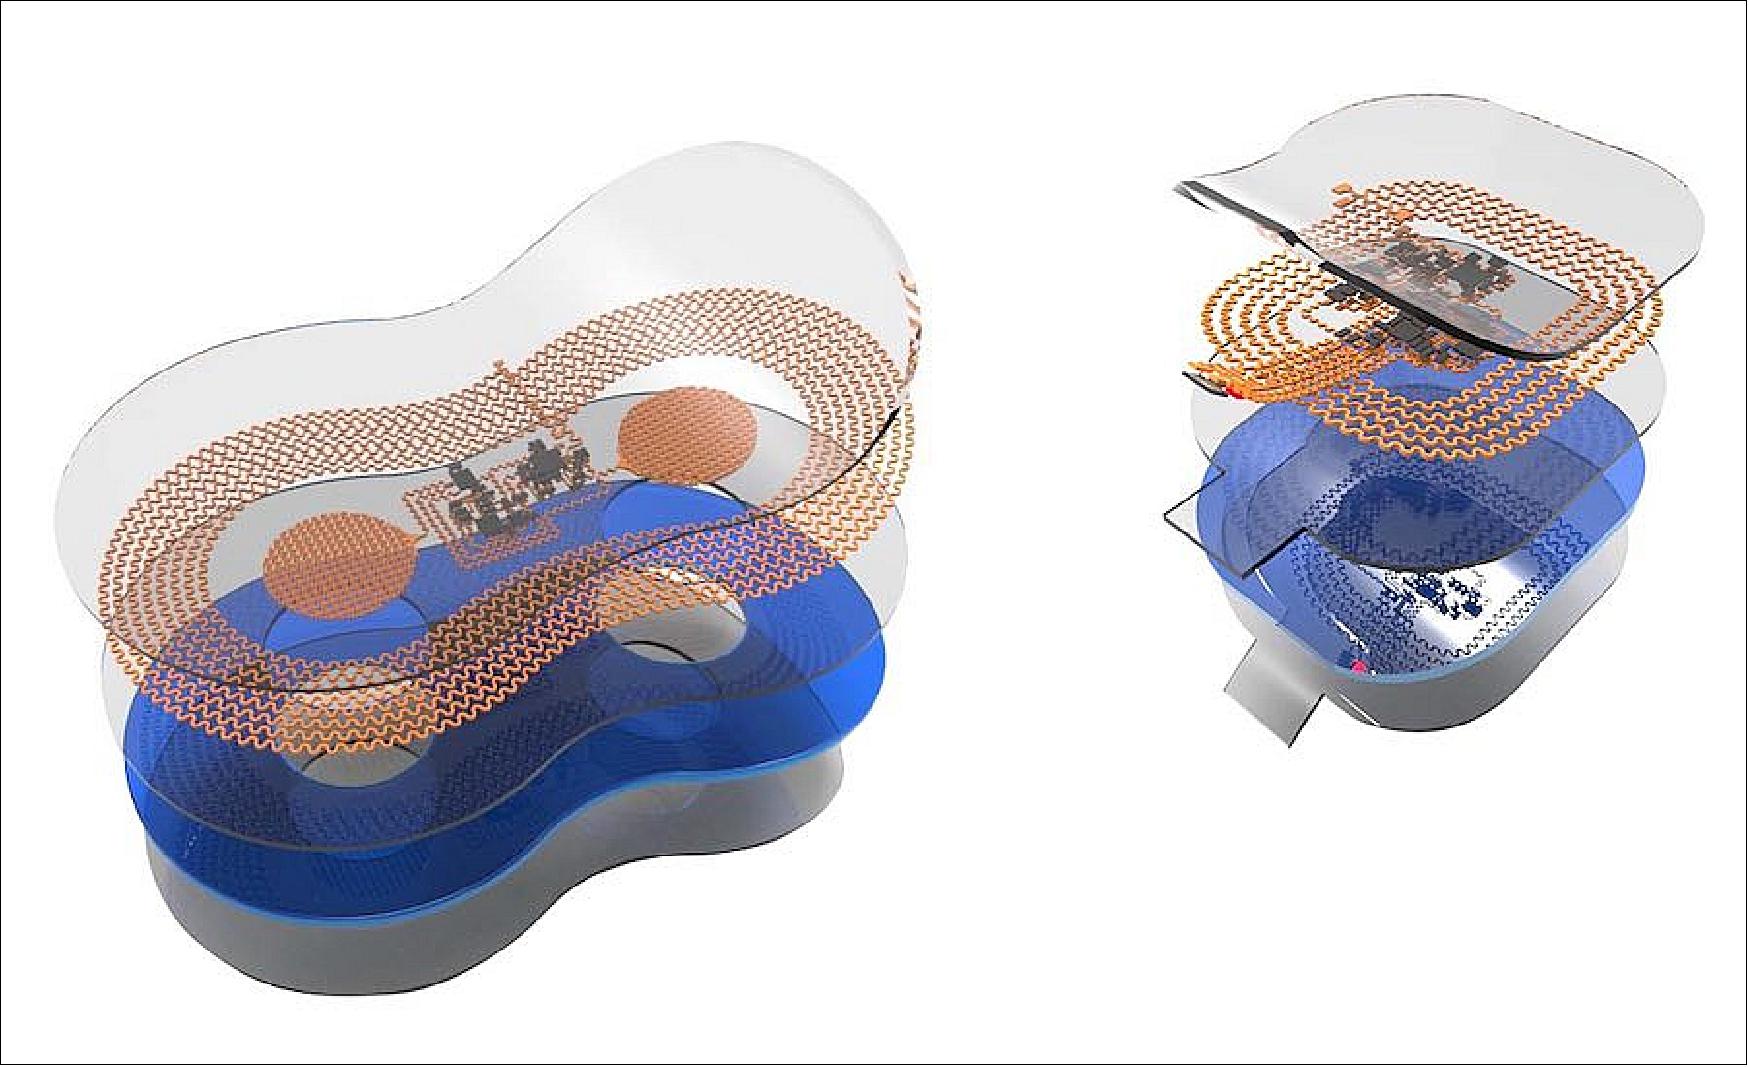 Figure 80: Dual wireless sensors – The chest sensor (left) measures 5 x 2.5 cm; the foot sensor (right) is 2.5 x 2 cm. Both sensors weigh as much as a raindrop (image credit: Northwestern)